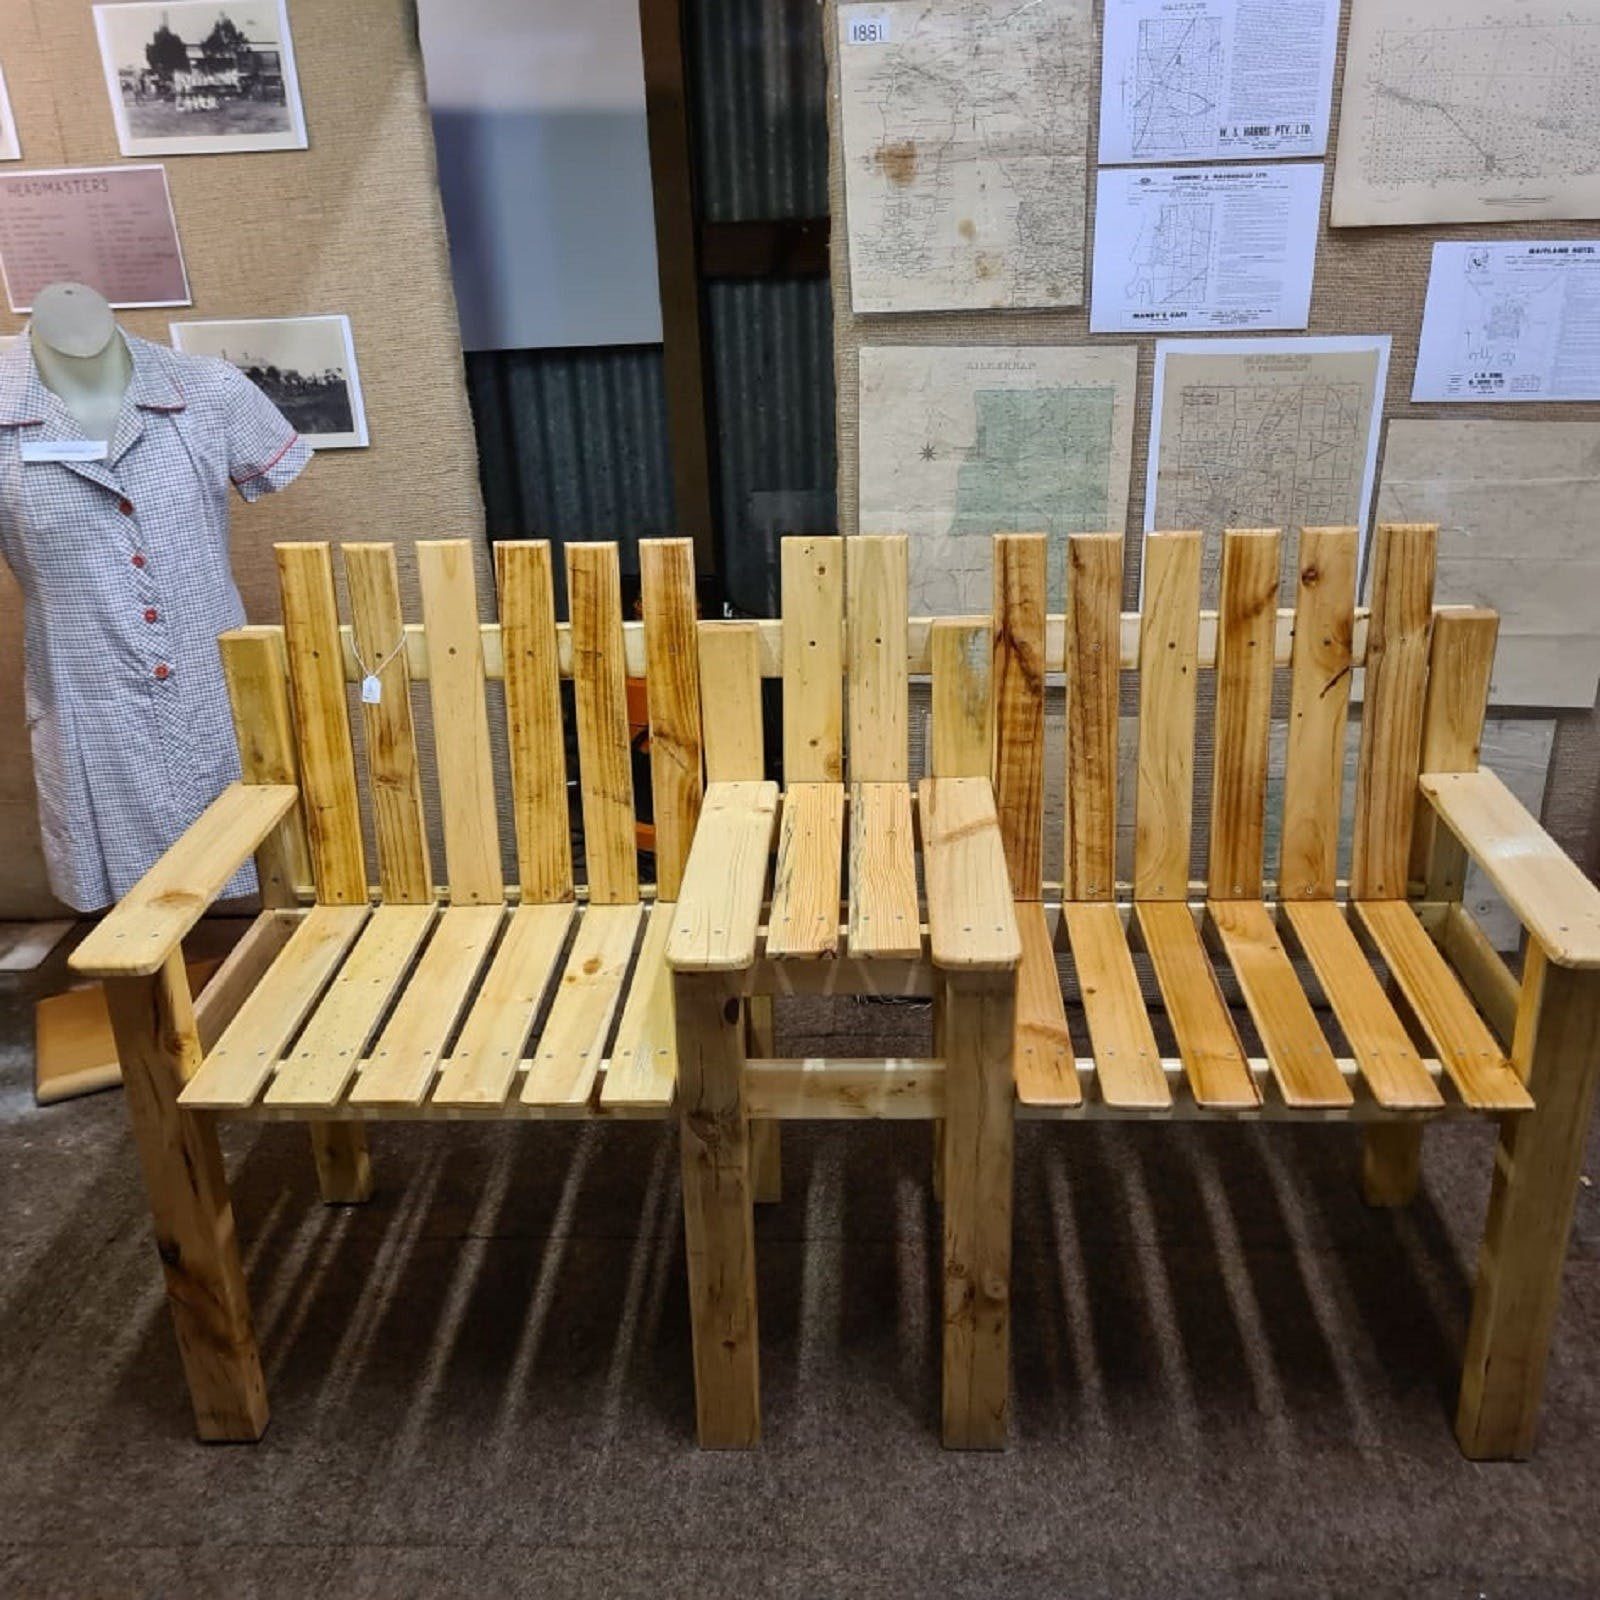 Hand made Jack 'n' Jill seat by our Men's Shed